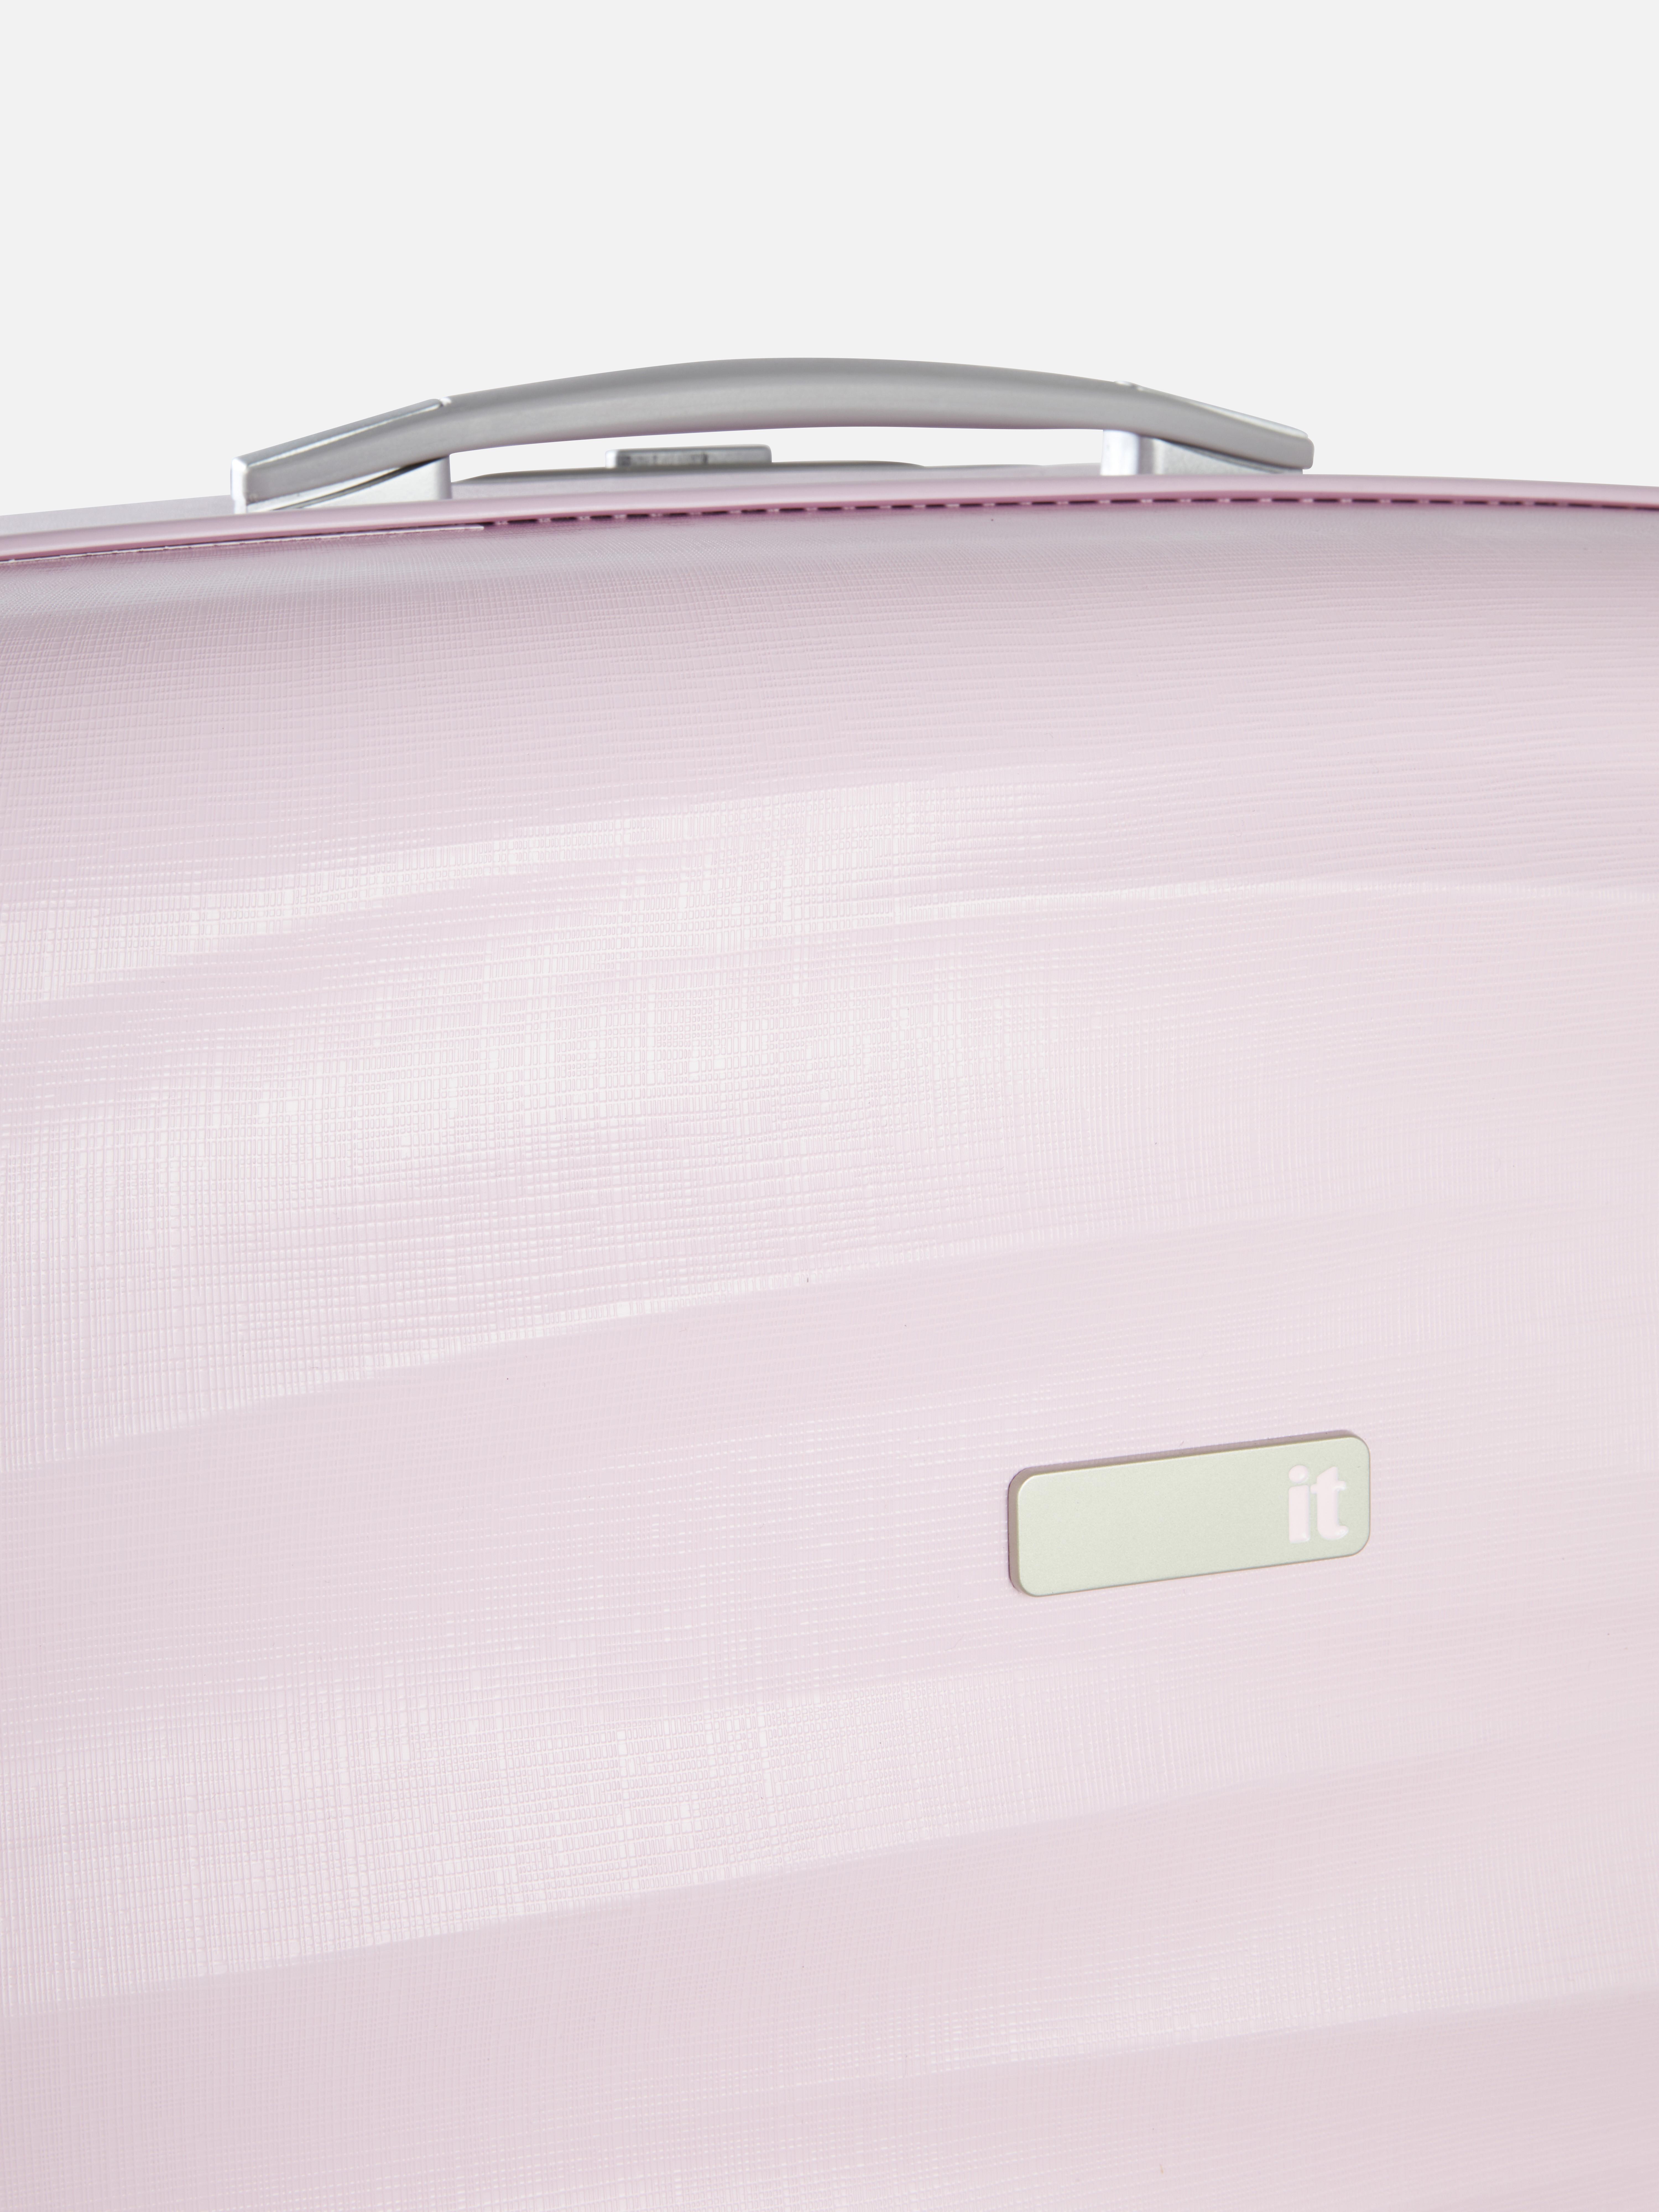 it Luggage Textured Hard Shell Suitcase